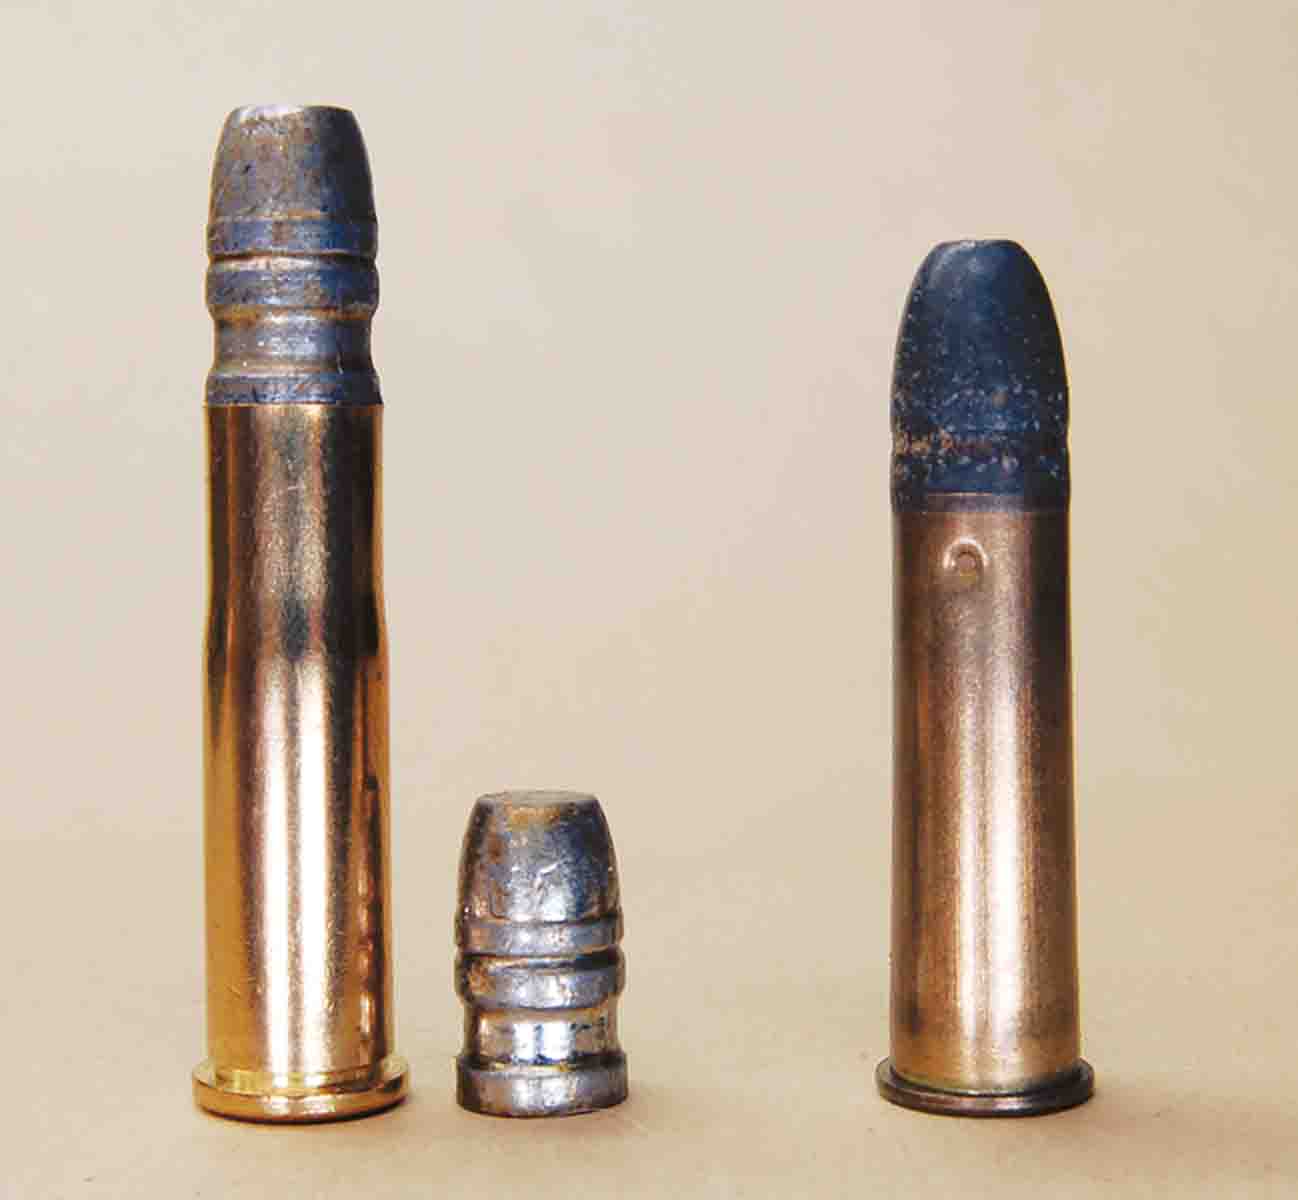 A new, unfired Starline .32-20 case would fit in the .310 chamber once the rim was thinned. The case was loaded with a pistol bullet. The bullet still didn’t touch the throat (left). A factory .310 cartridge is shown at right.